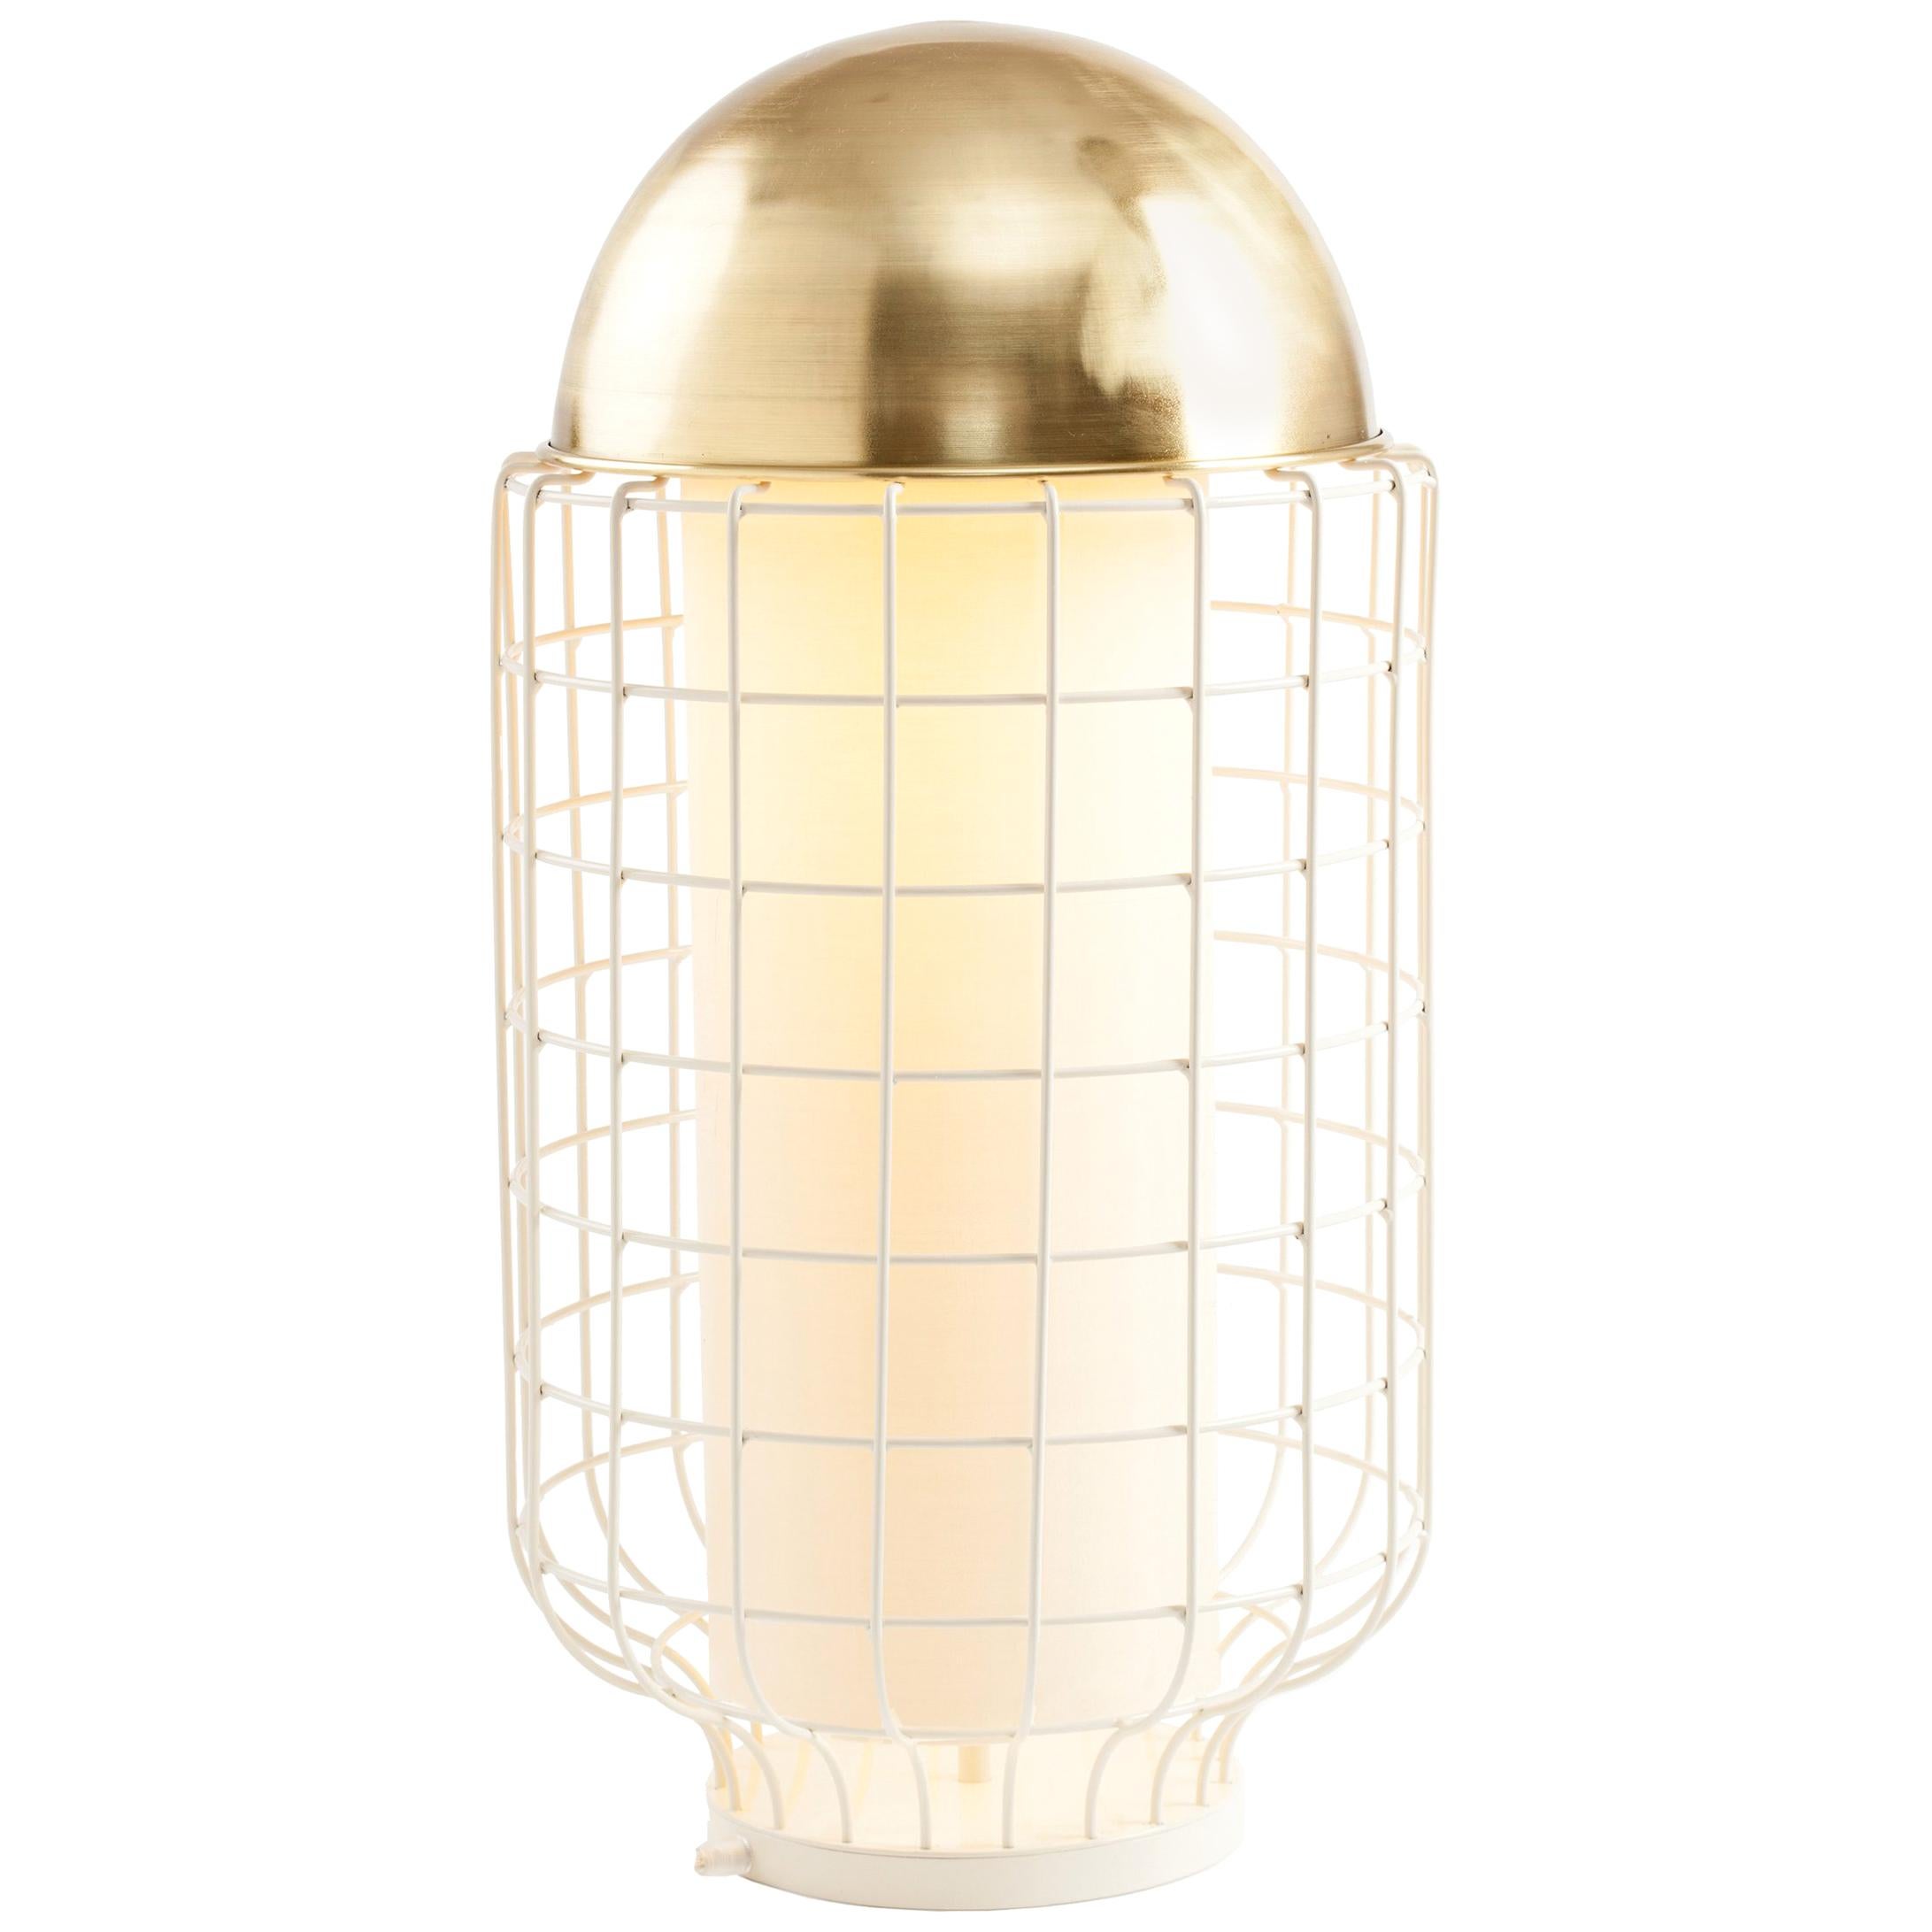 21st Century Art Deco Magnolia Table Lamp Ivory and Polished Brass